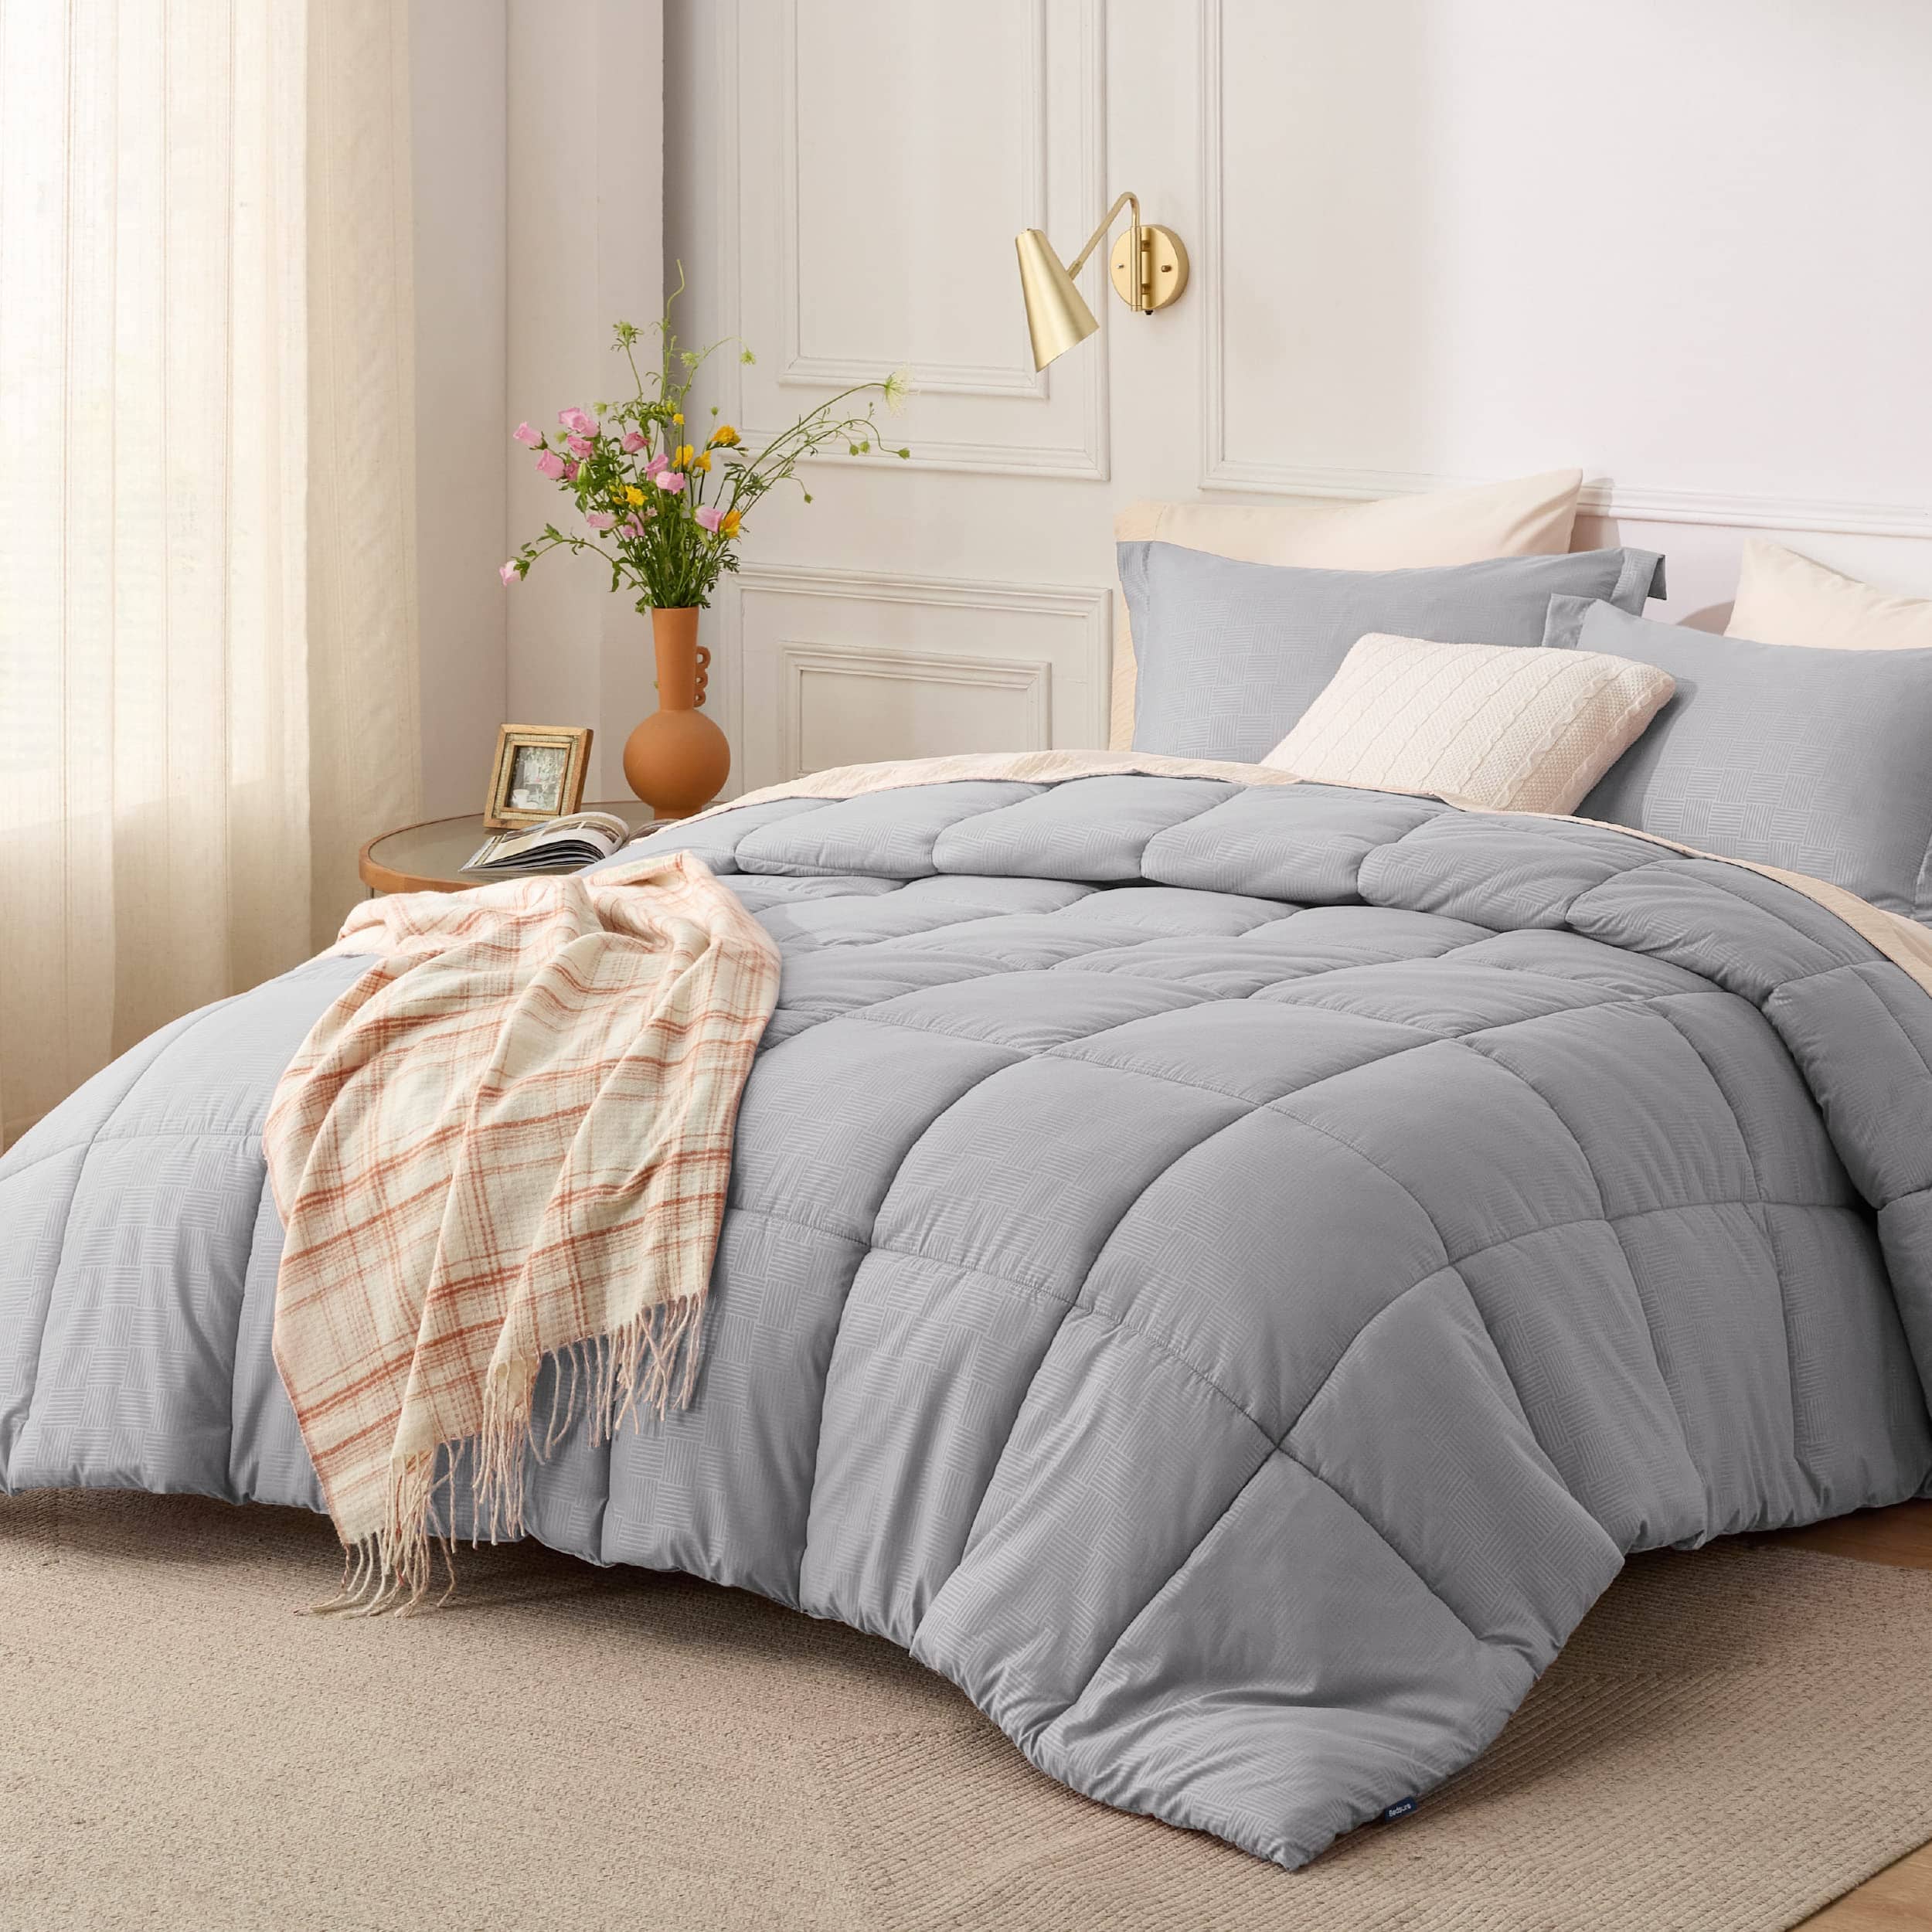 Cozy | Linens Official Home Website Affordable and Bedsure